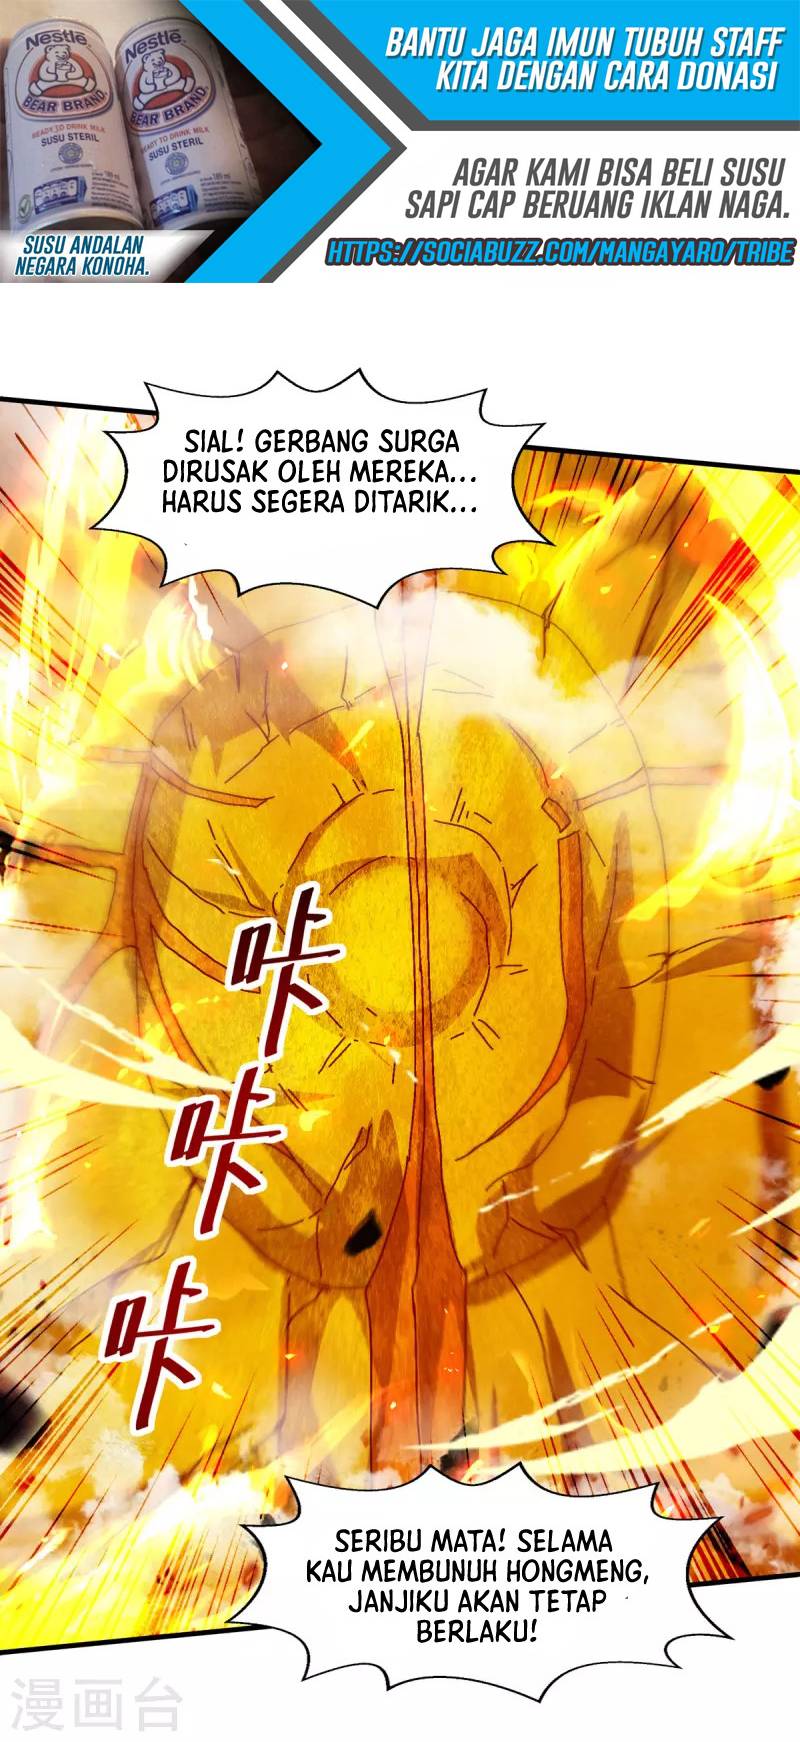 Against The Heaven Supreme (Heaven Guards) Chapter 71 - 197